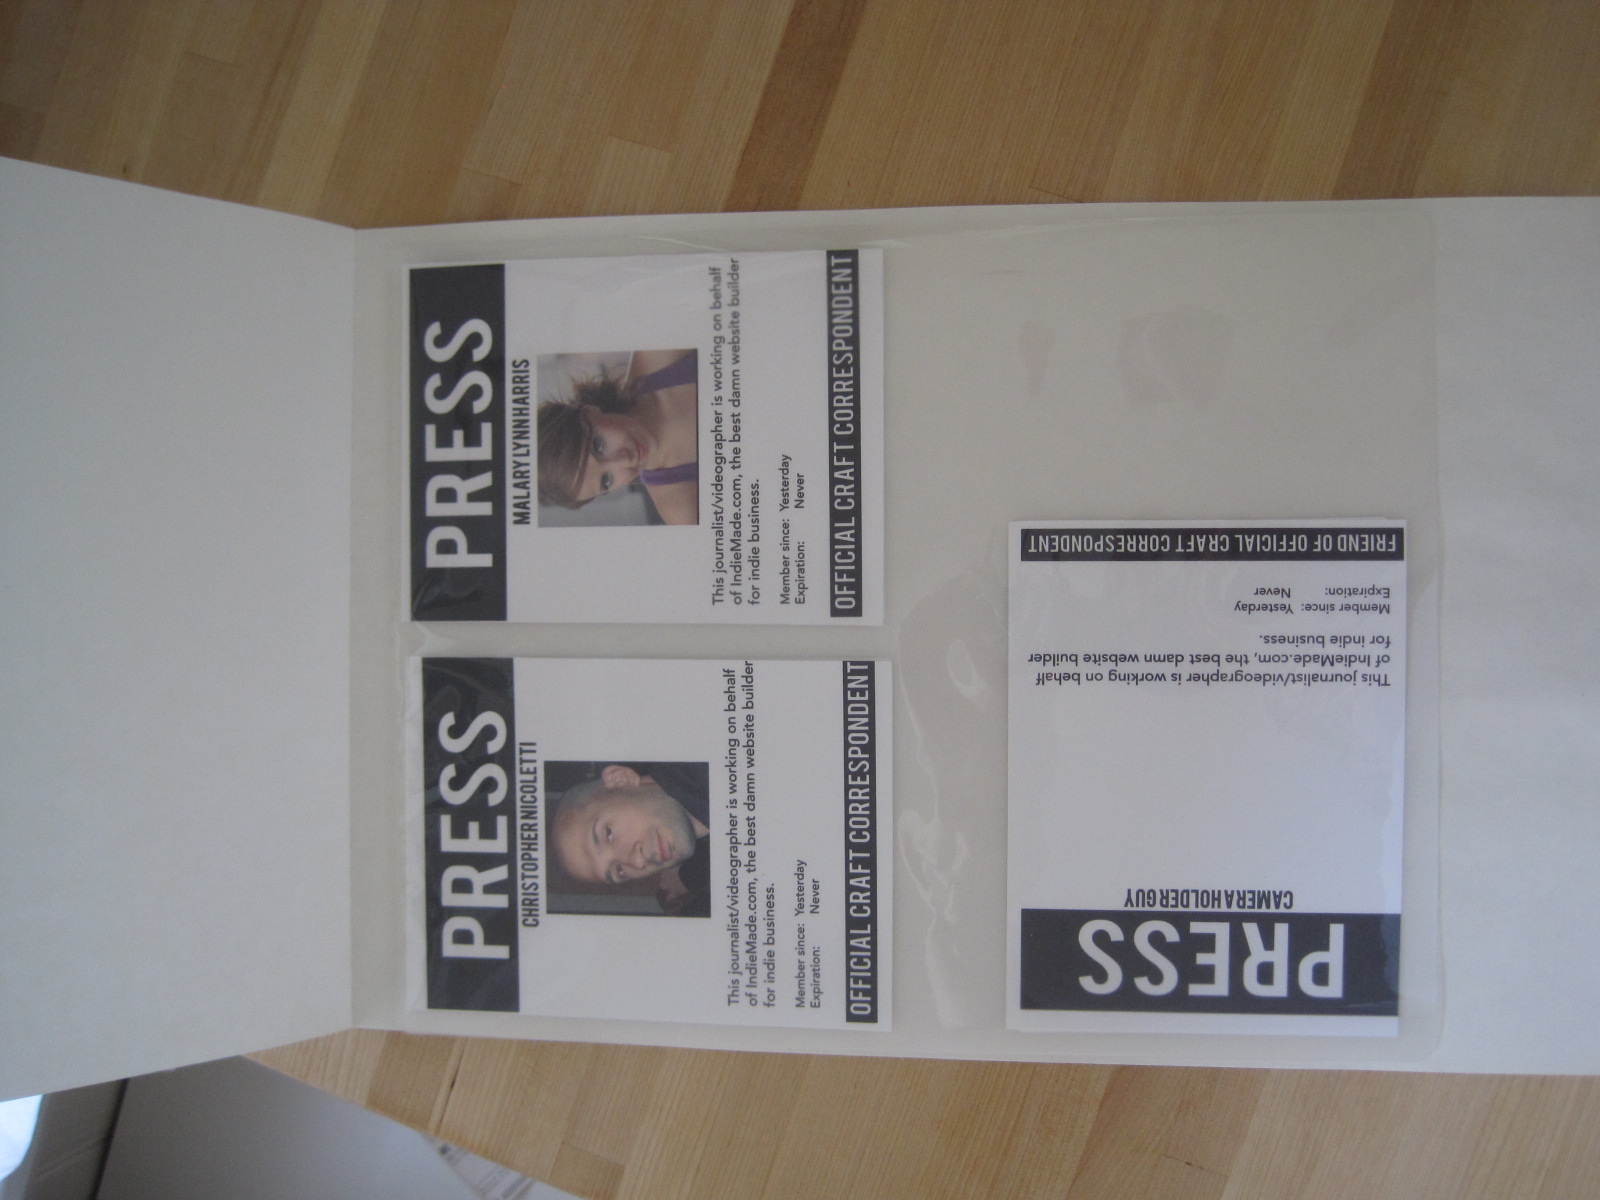 Places badges in a lamination pouch